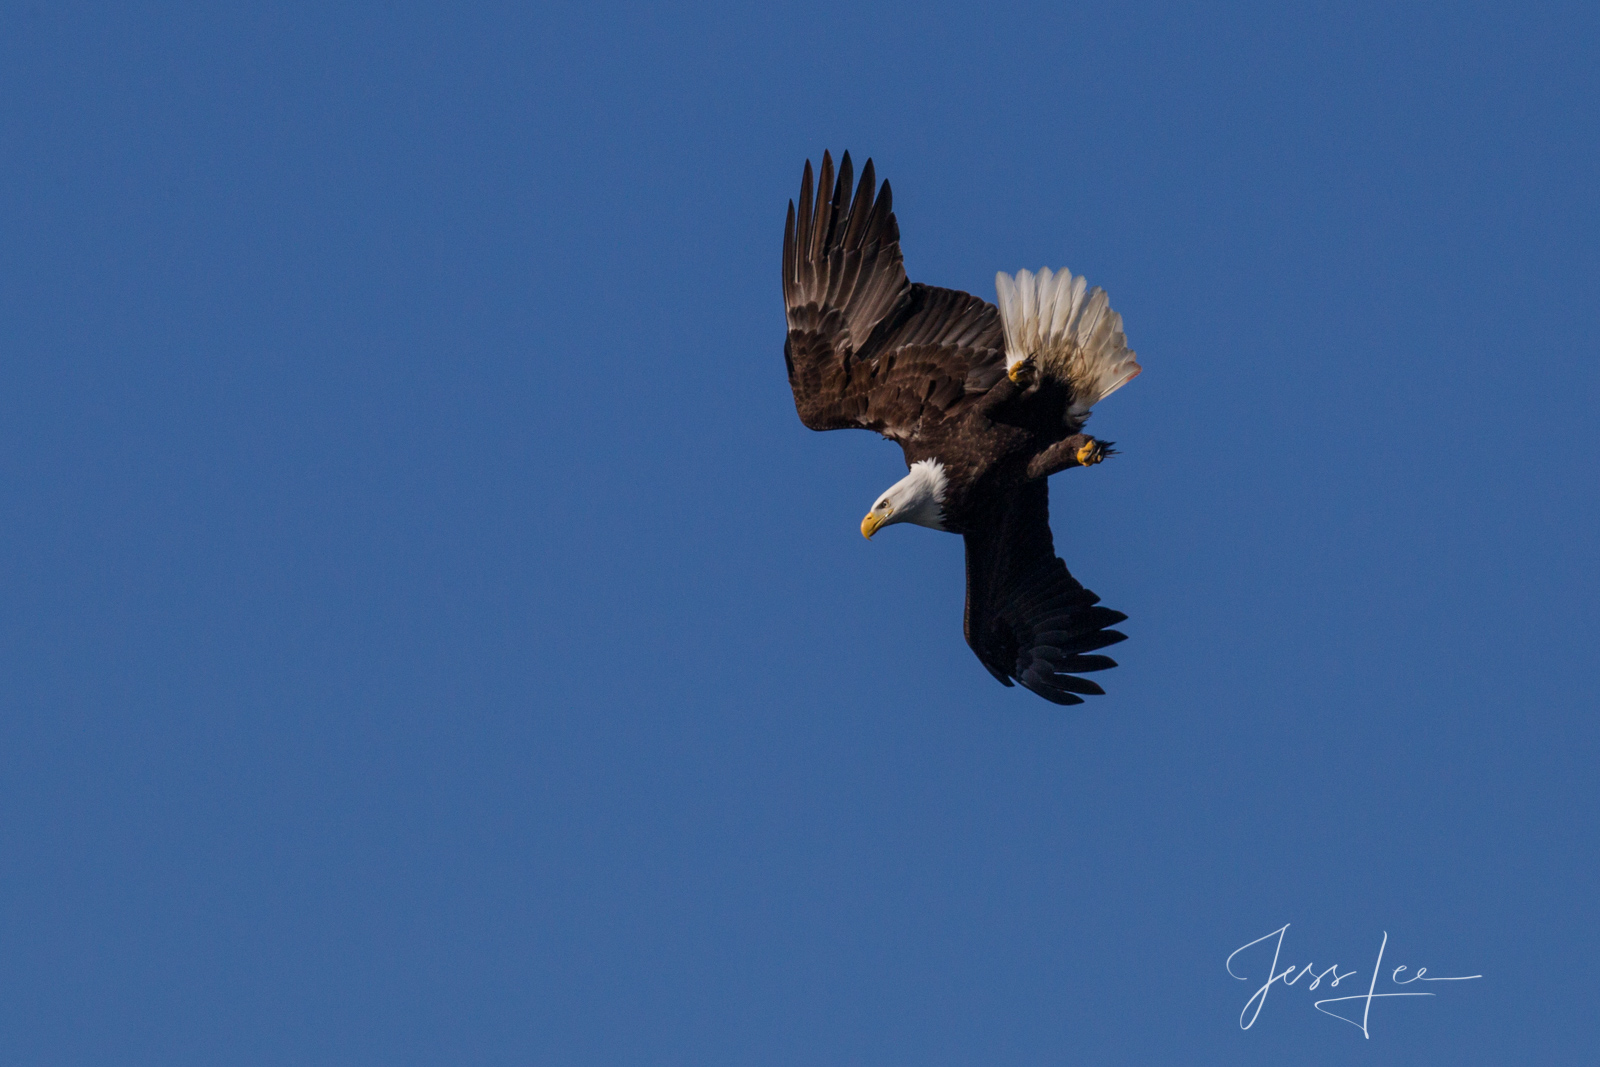 Bring home the power and beauty of the amazing fine art American Bald Eagle photograph Diving Eagle by Jess Lee from his Wildlife...